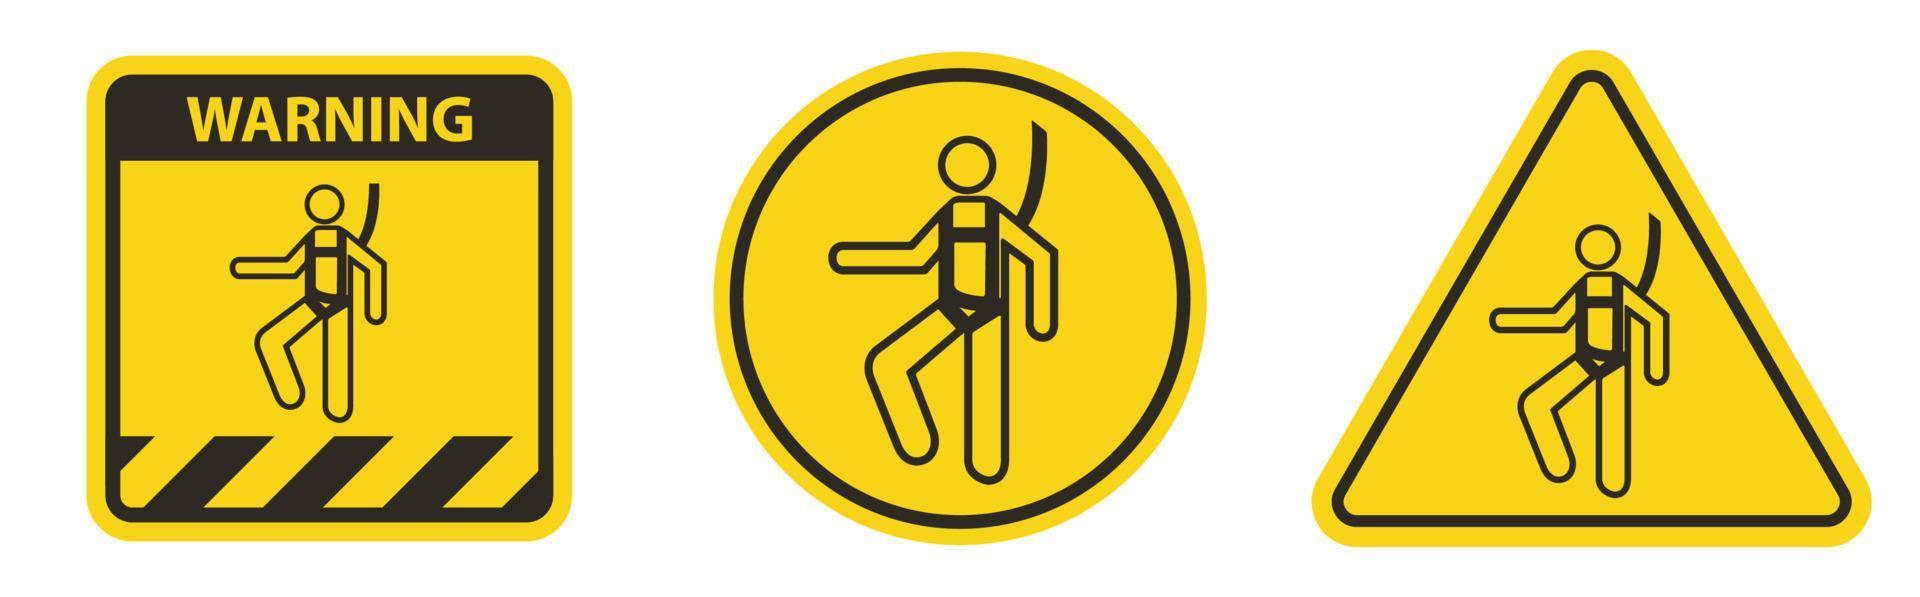 Symbol Wear Safety Harness Sign Isolate On White Background,Vector Illustration EPS.10 vector